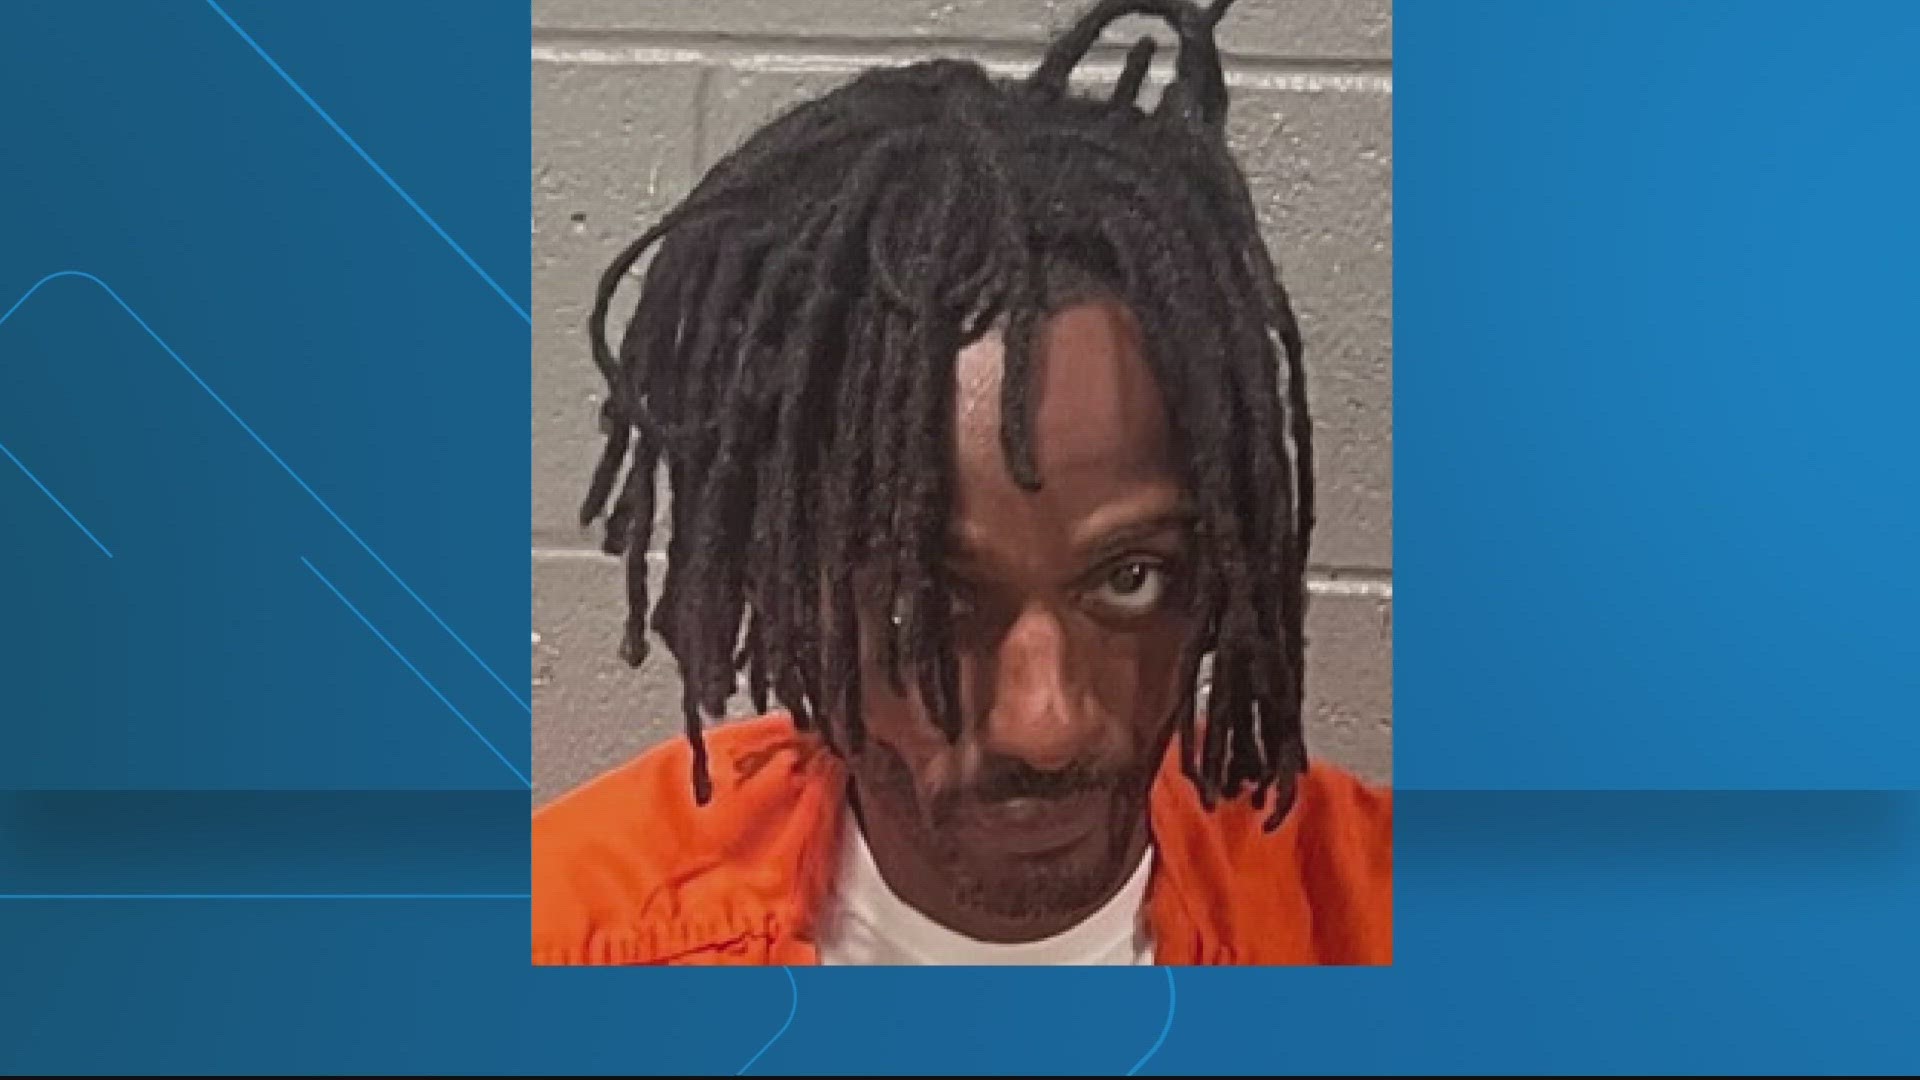 43-year-old Keith Maybin Junior is facing several charges -- including first and second degree murder. Investigators say he shot 43-year-old Courtney Blacksher.